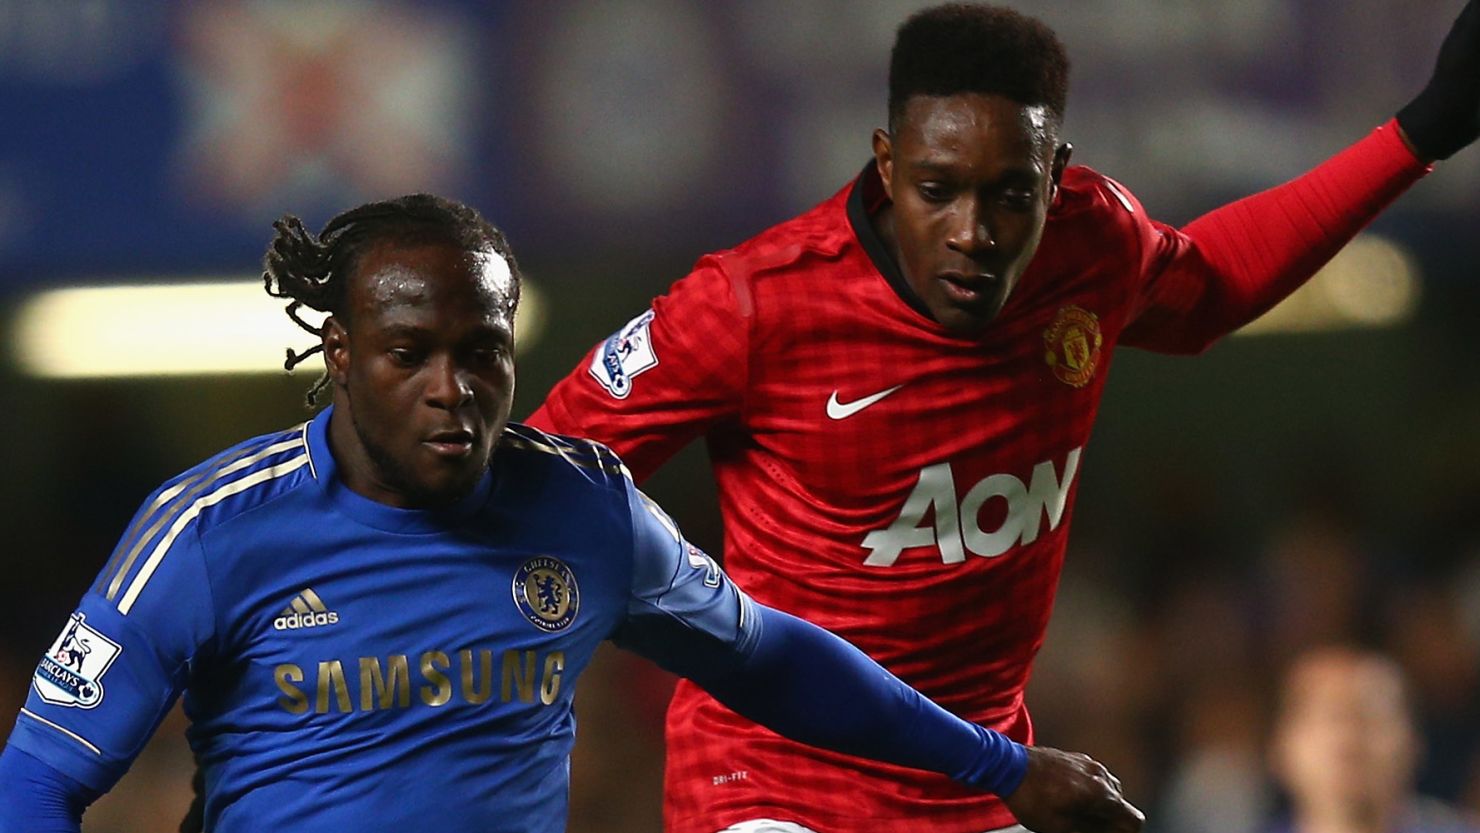 Manchester United's Danny Welbeck, right, appeared to be the target of alleged racist abuse during his side's defeat at Chelsea.